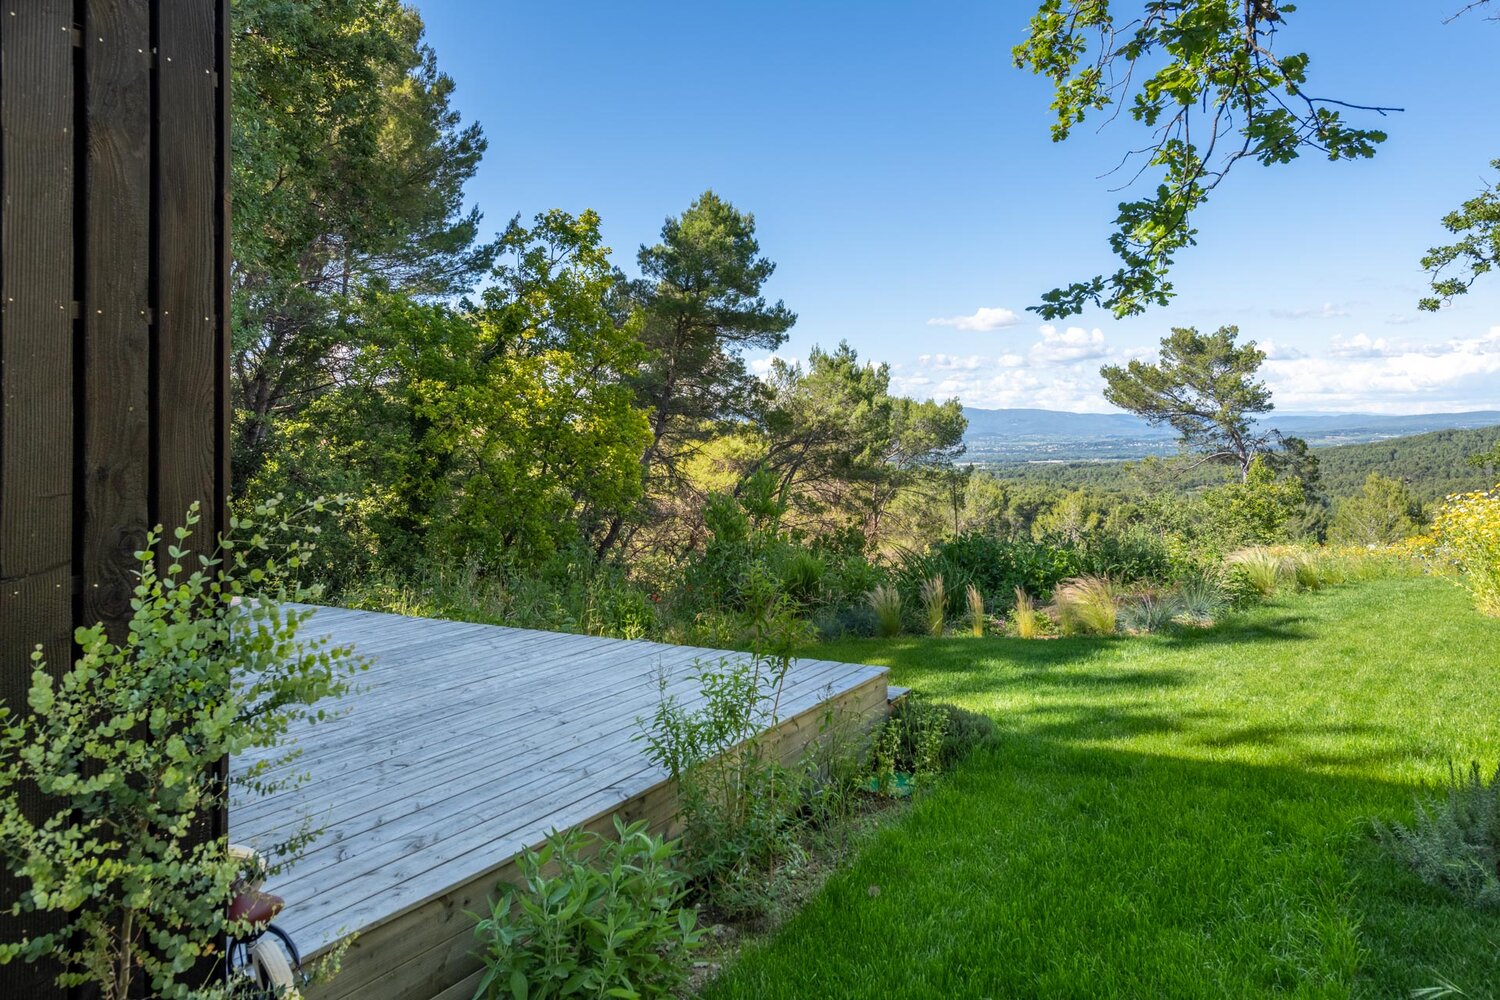 A Minimalistic Wooden Home with Amazing Views over the Provence Countryside - The Nordroom